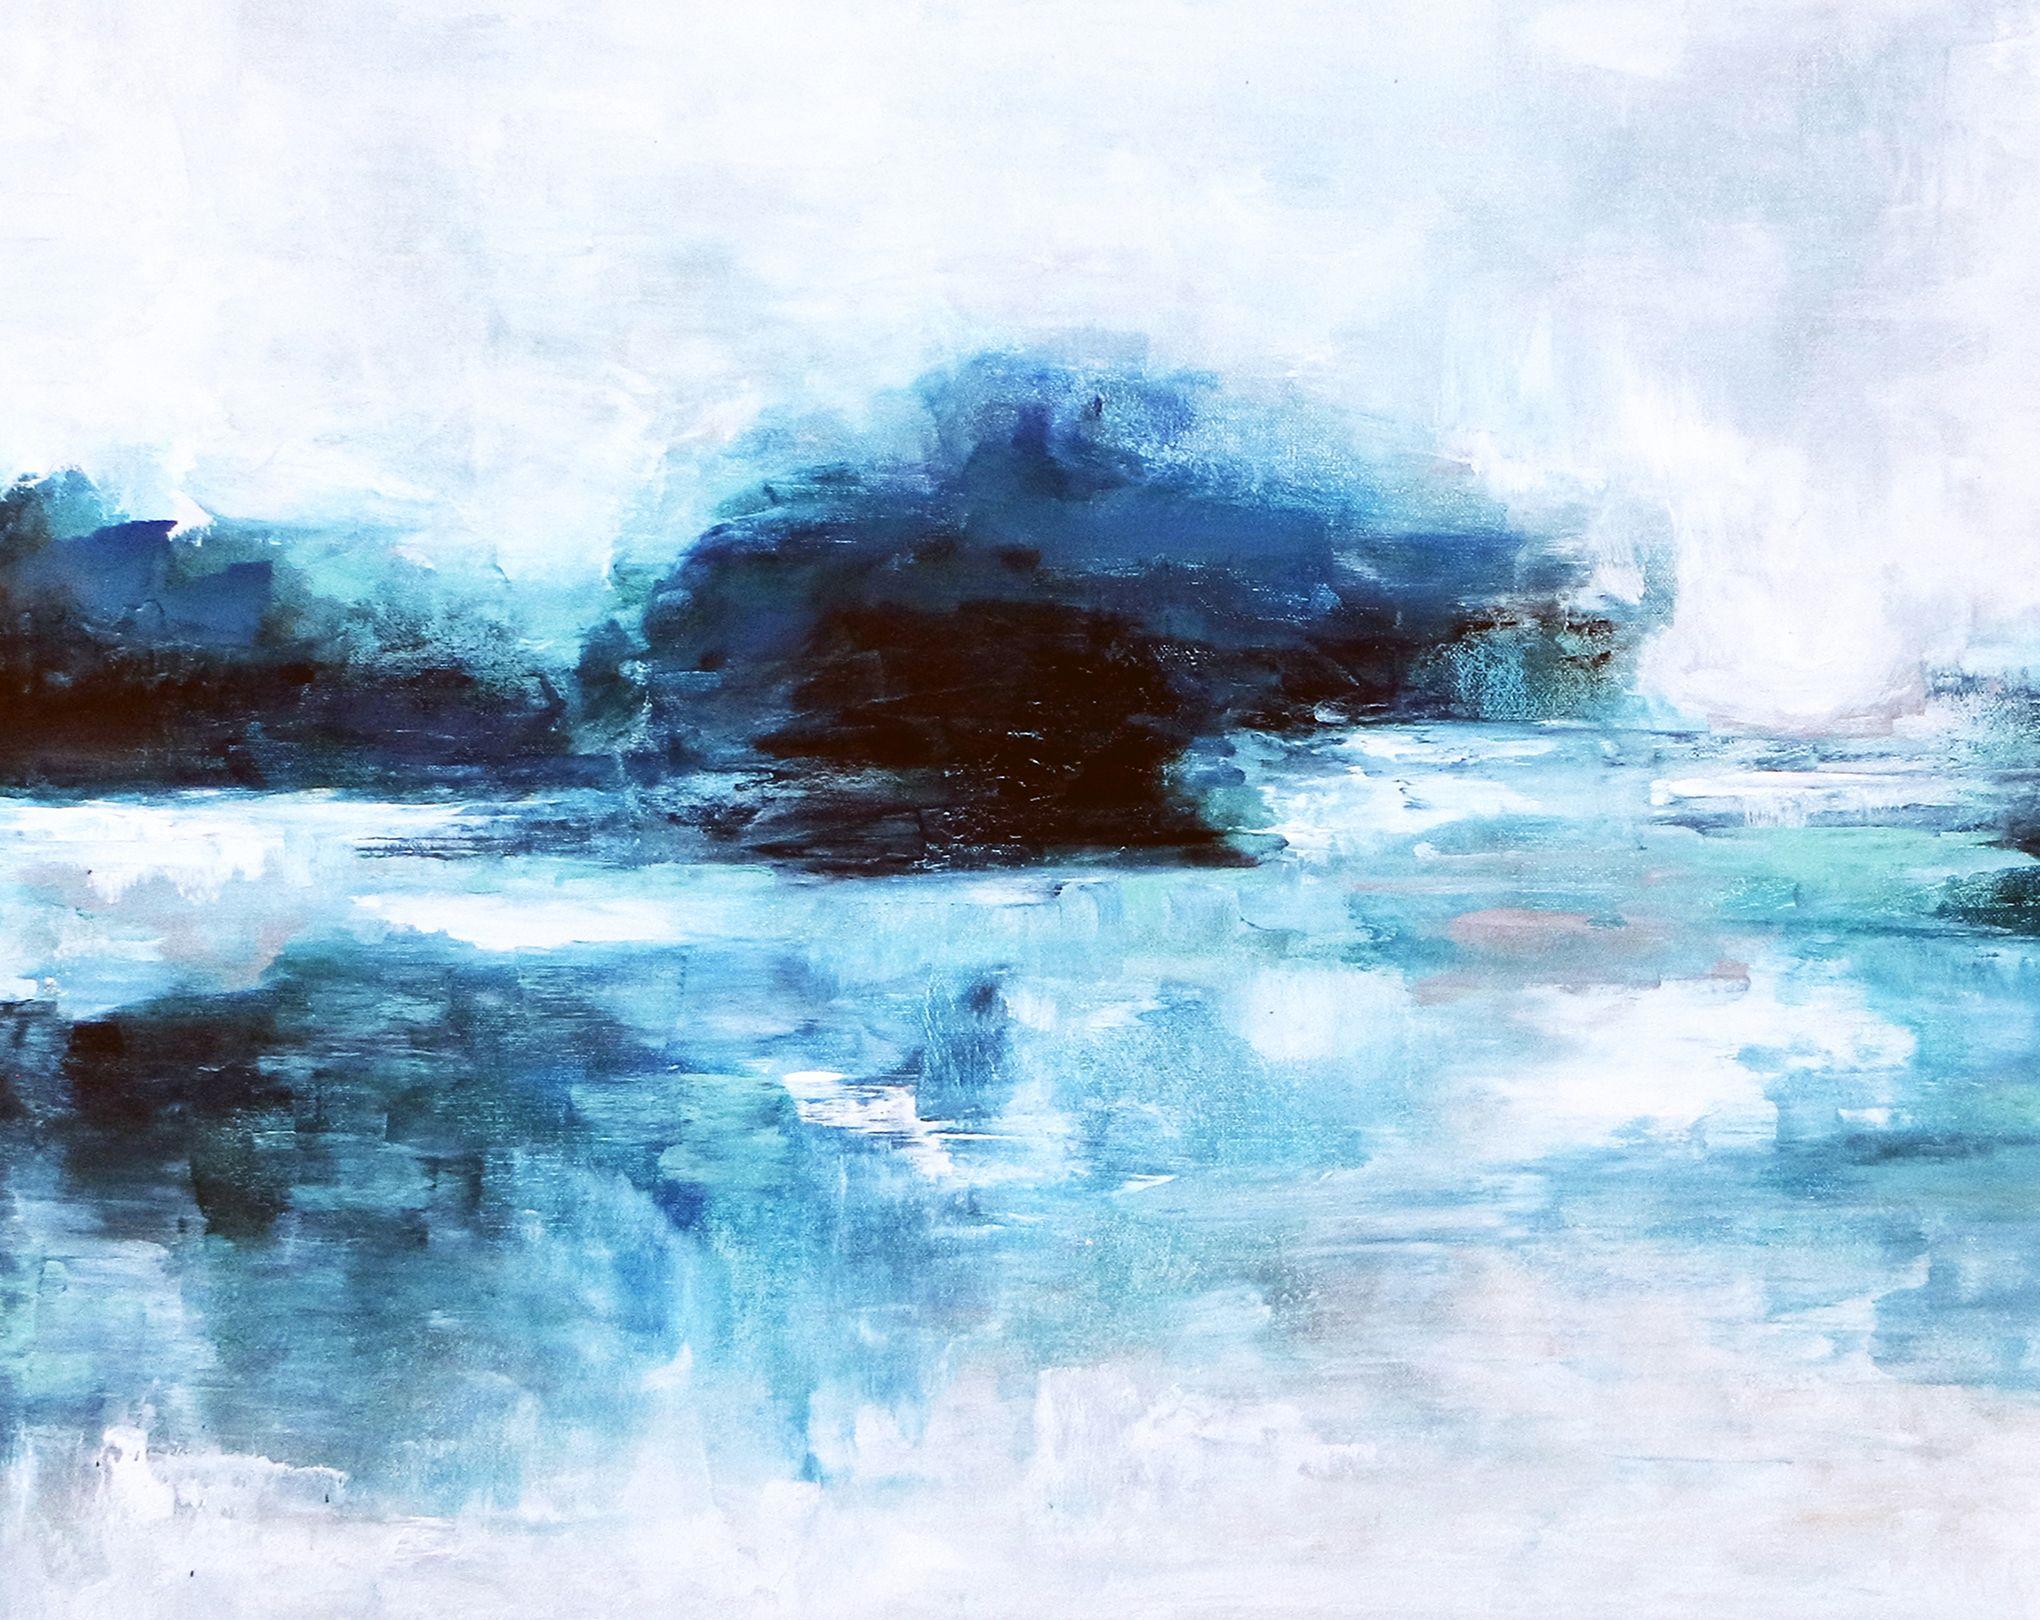 A Lake, Painting, Acrylic on Canvas - Blue Abstract Painting by Hyunah Kim